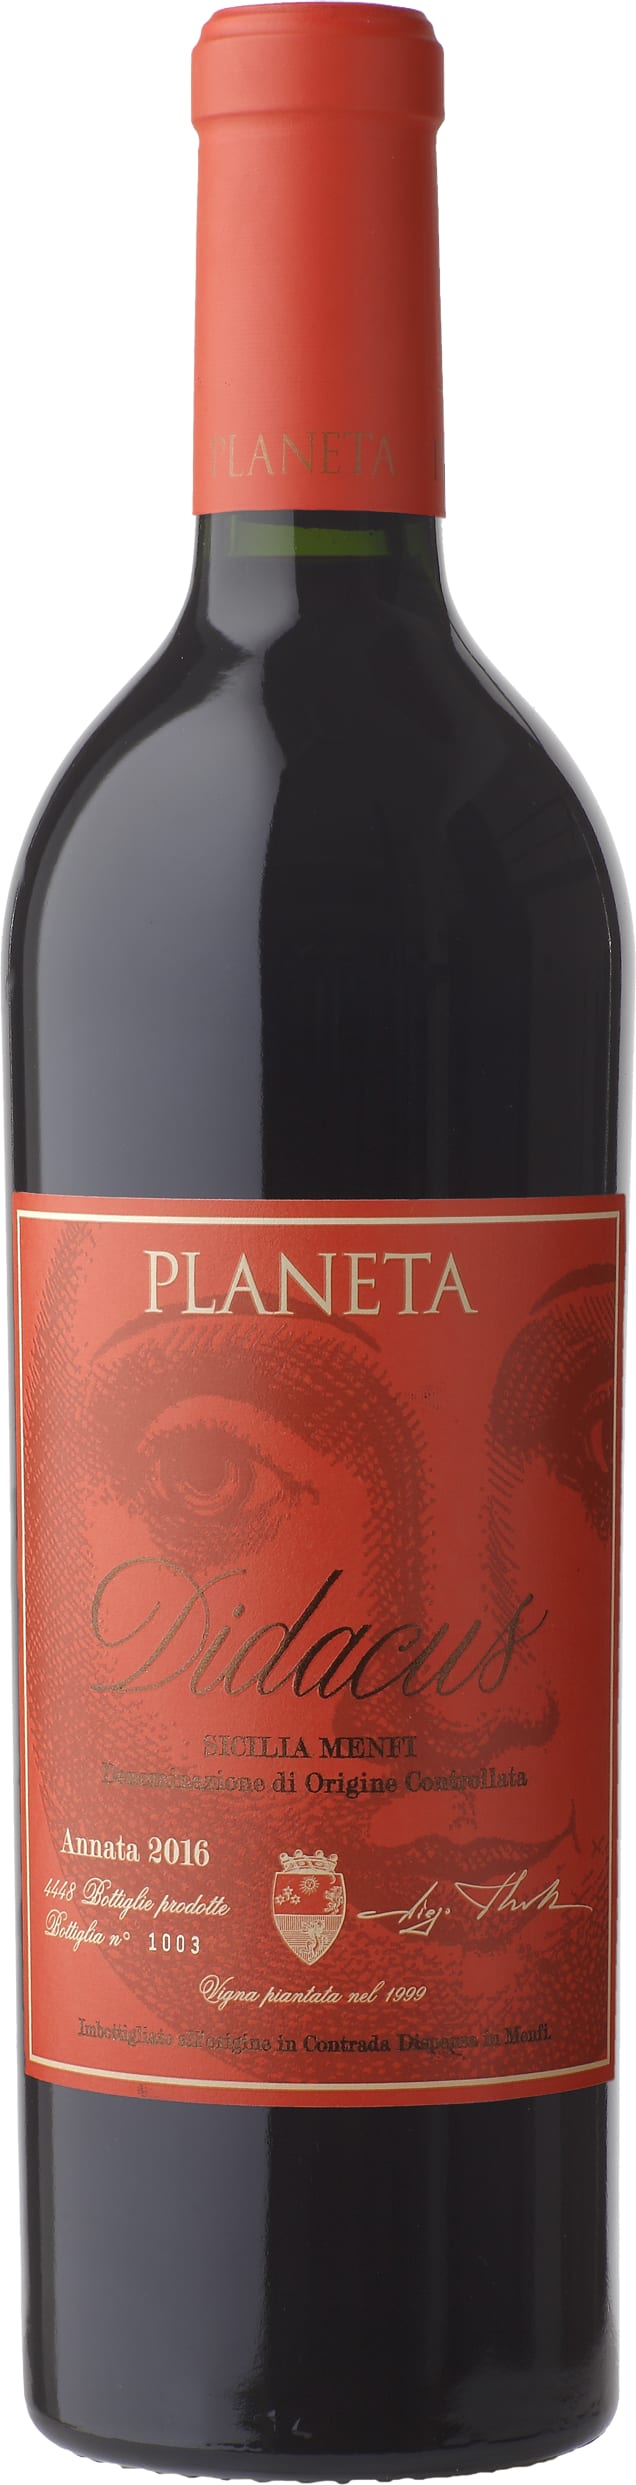 Planeta Didacus Rosso 2018 75cl - Buy Planeta Wines from GREAT WINES DIRECT wine shop